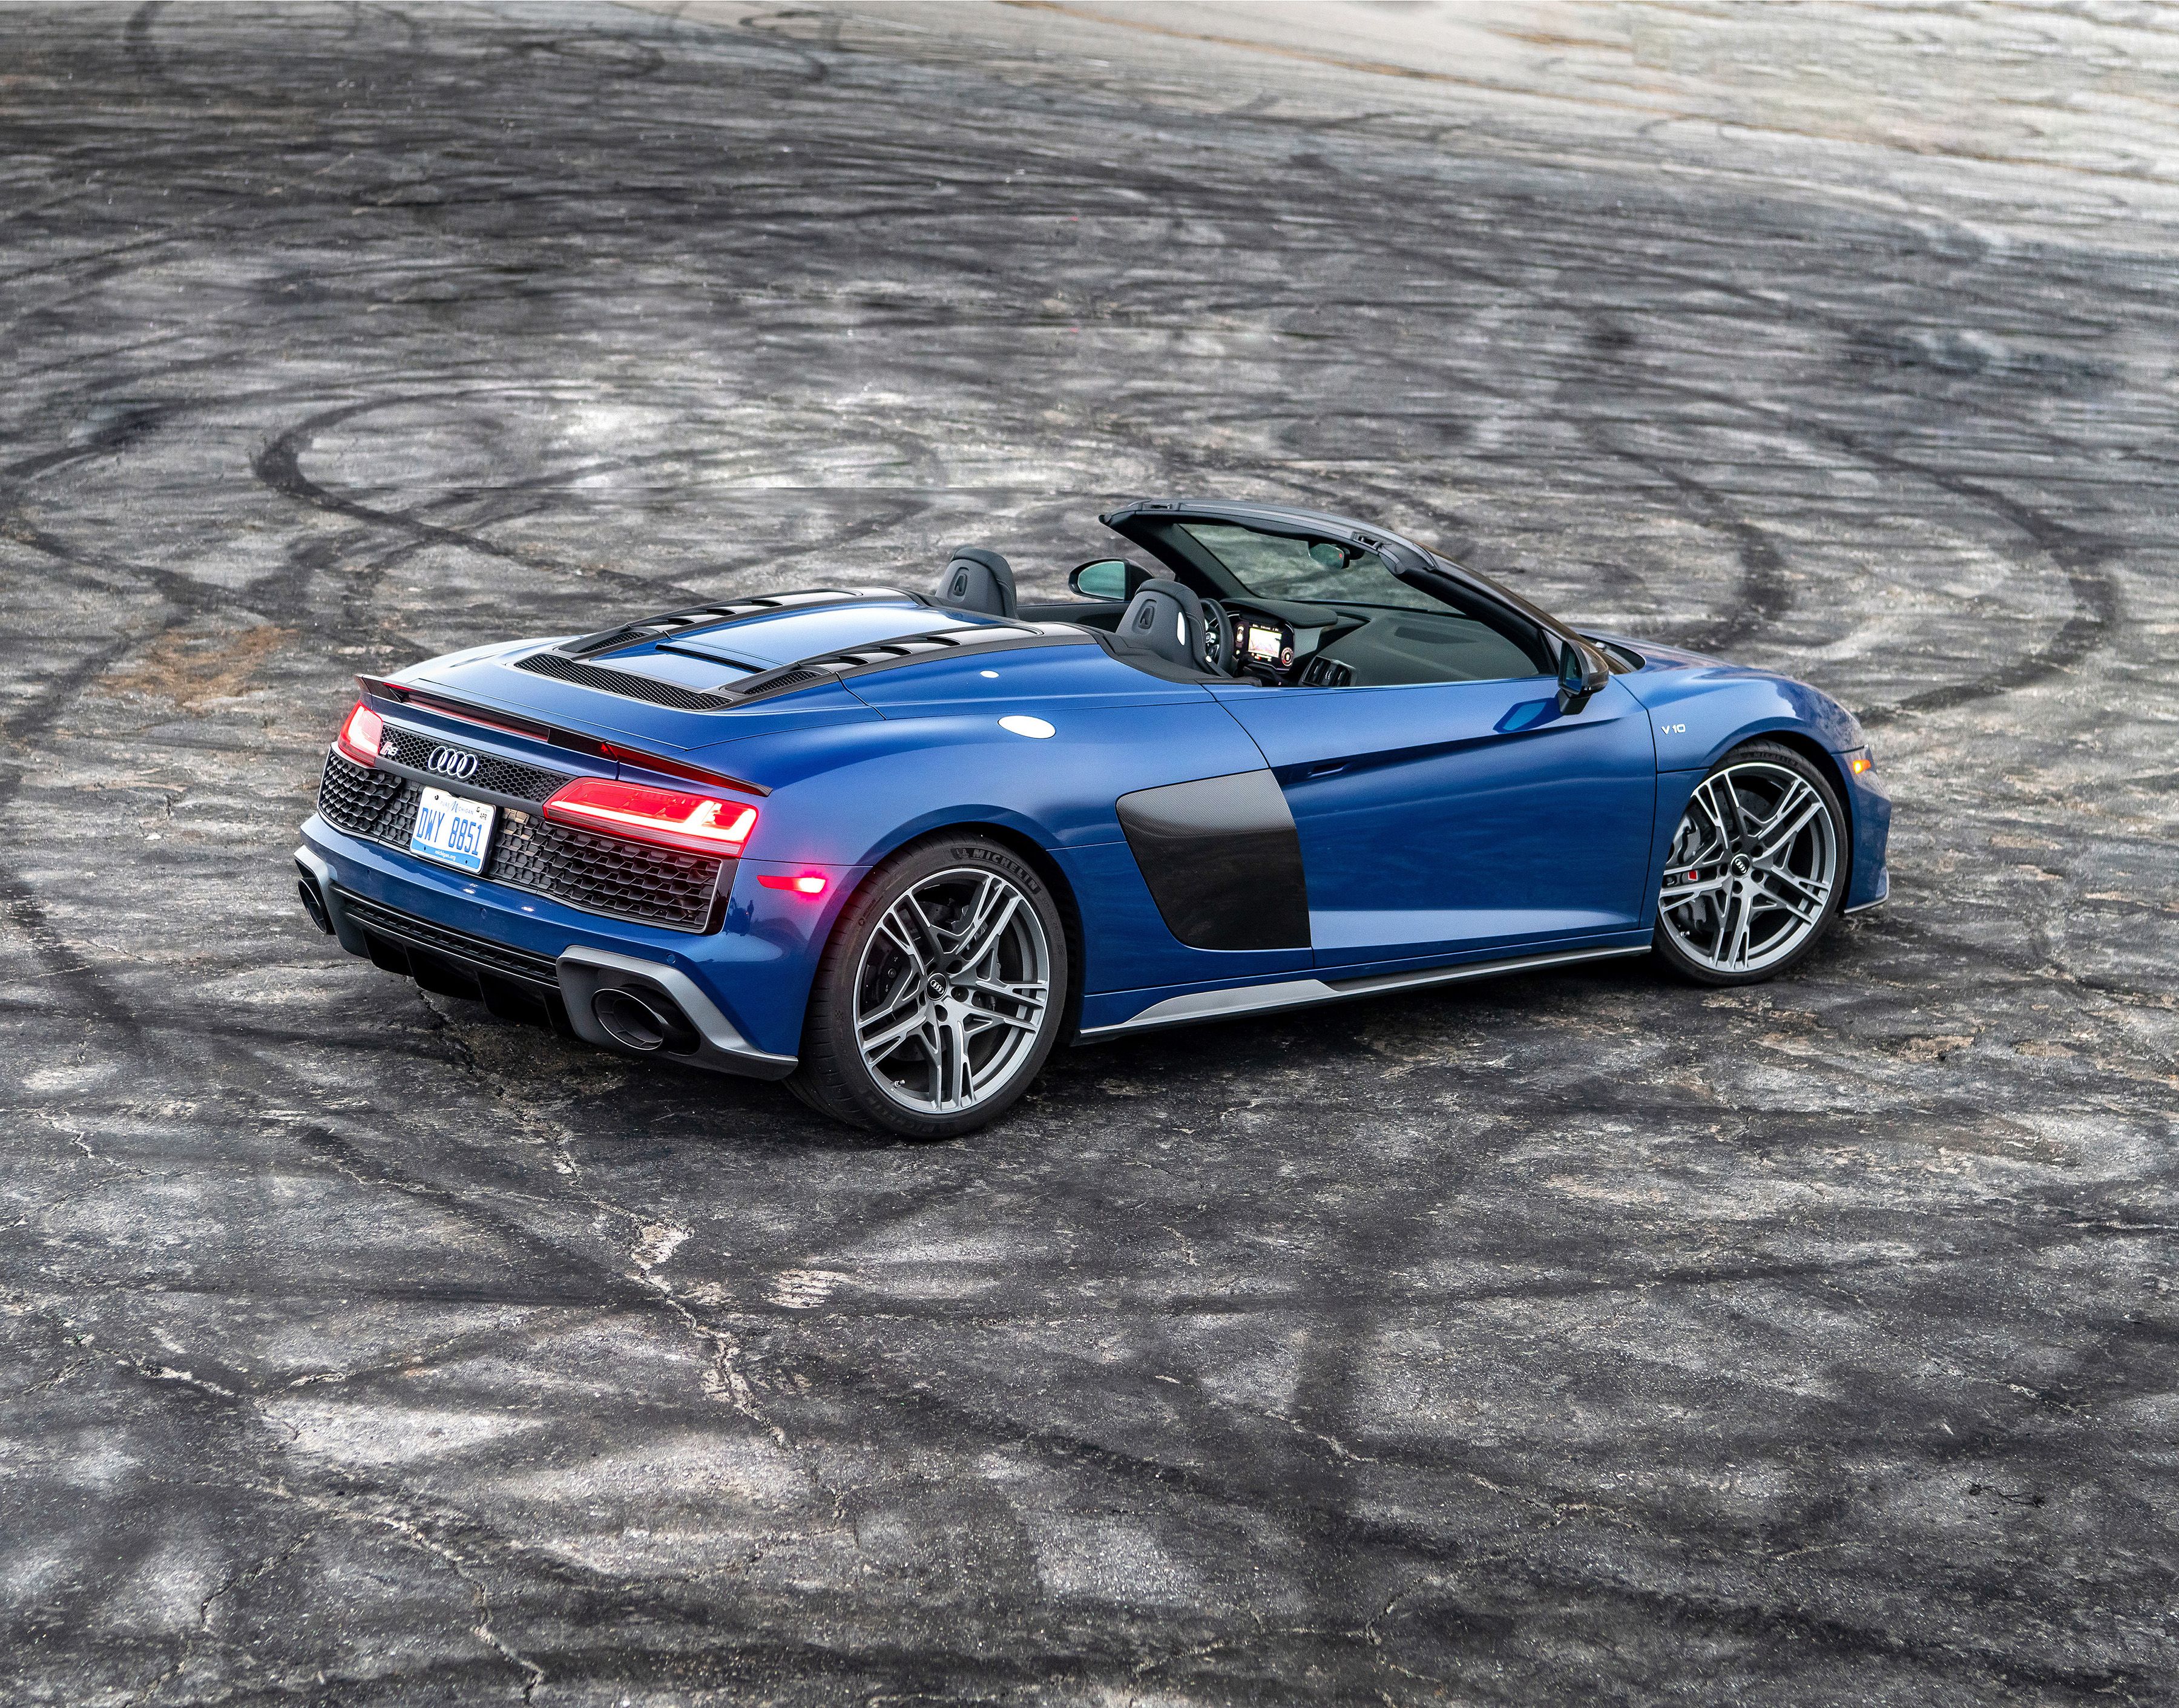 Reception solnedgang Caroline 2020 Audi R8 Spyder Was Made to Chase Sunsets